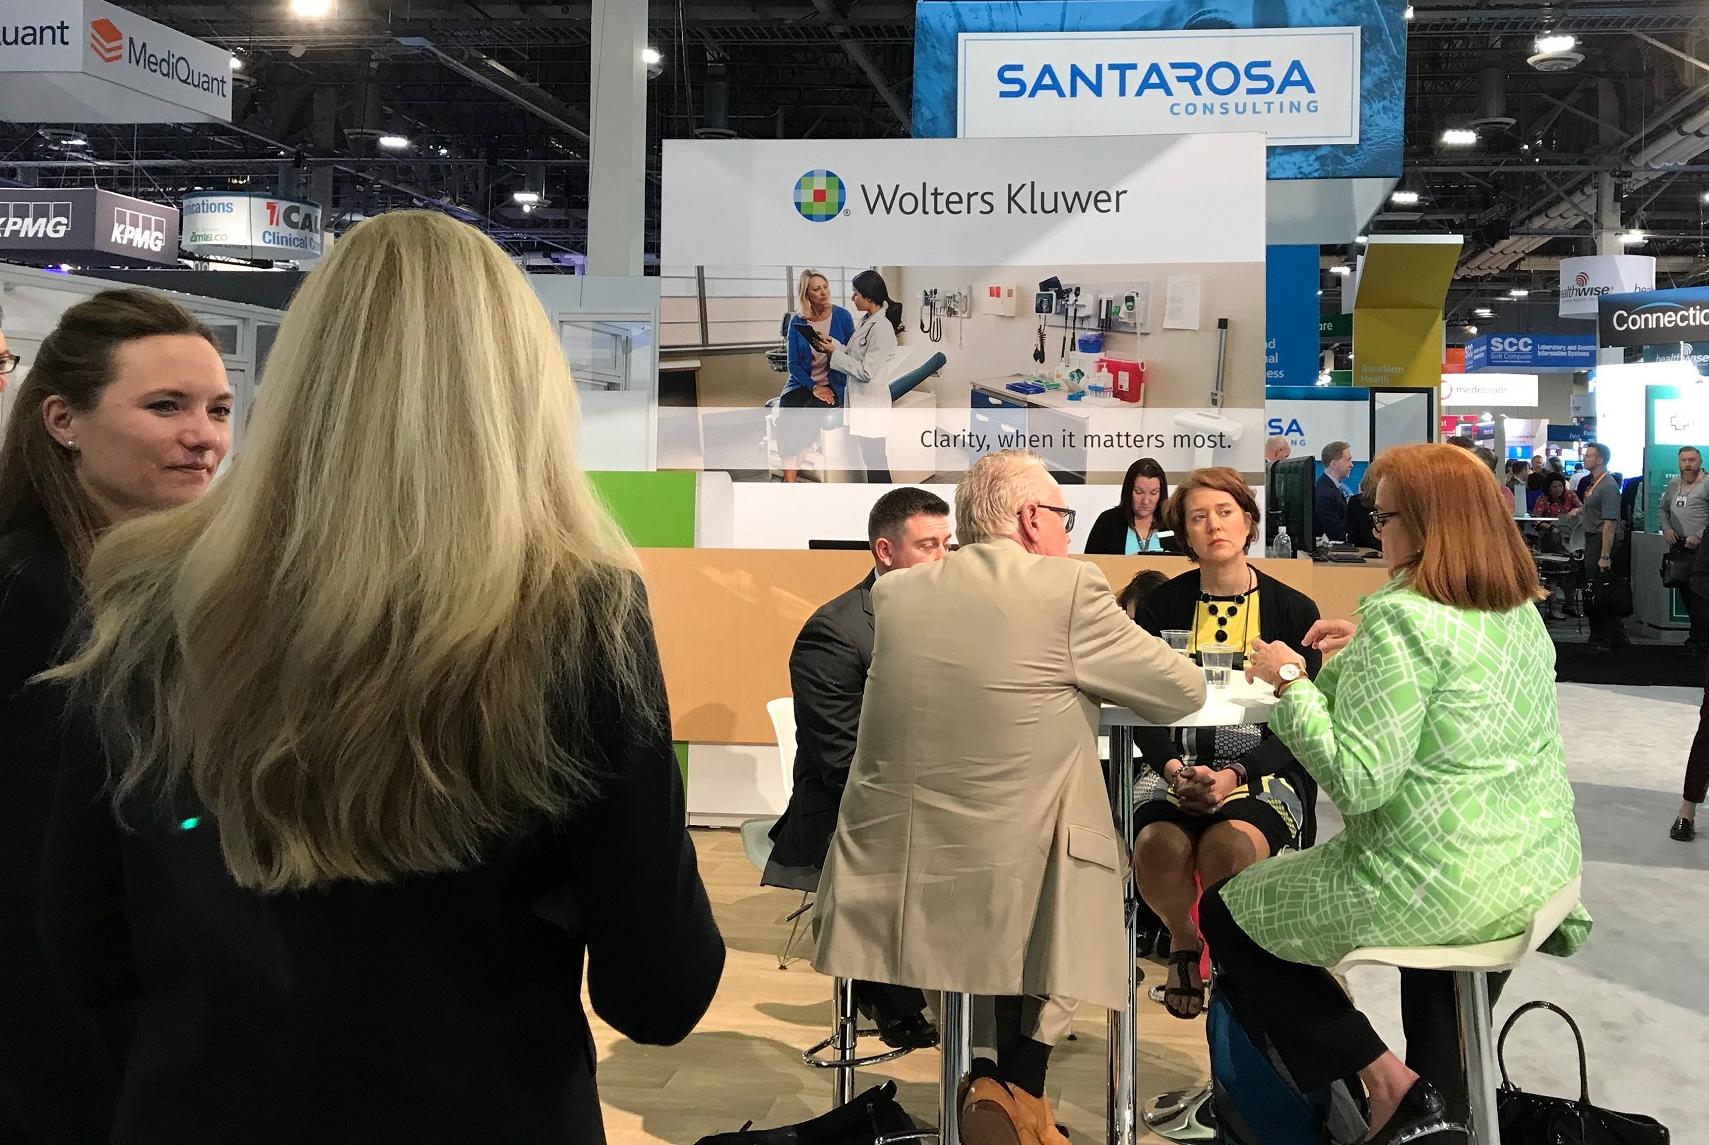 Groups of people gather at the Wolters Kluwer booth at the HIMSS conference.